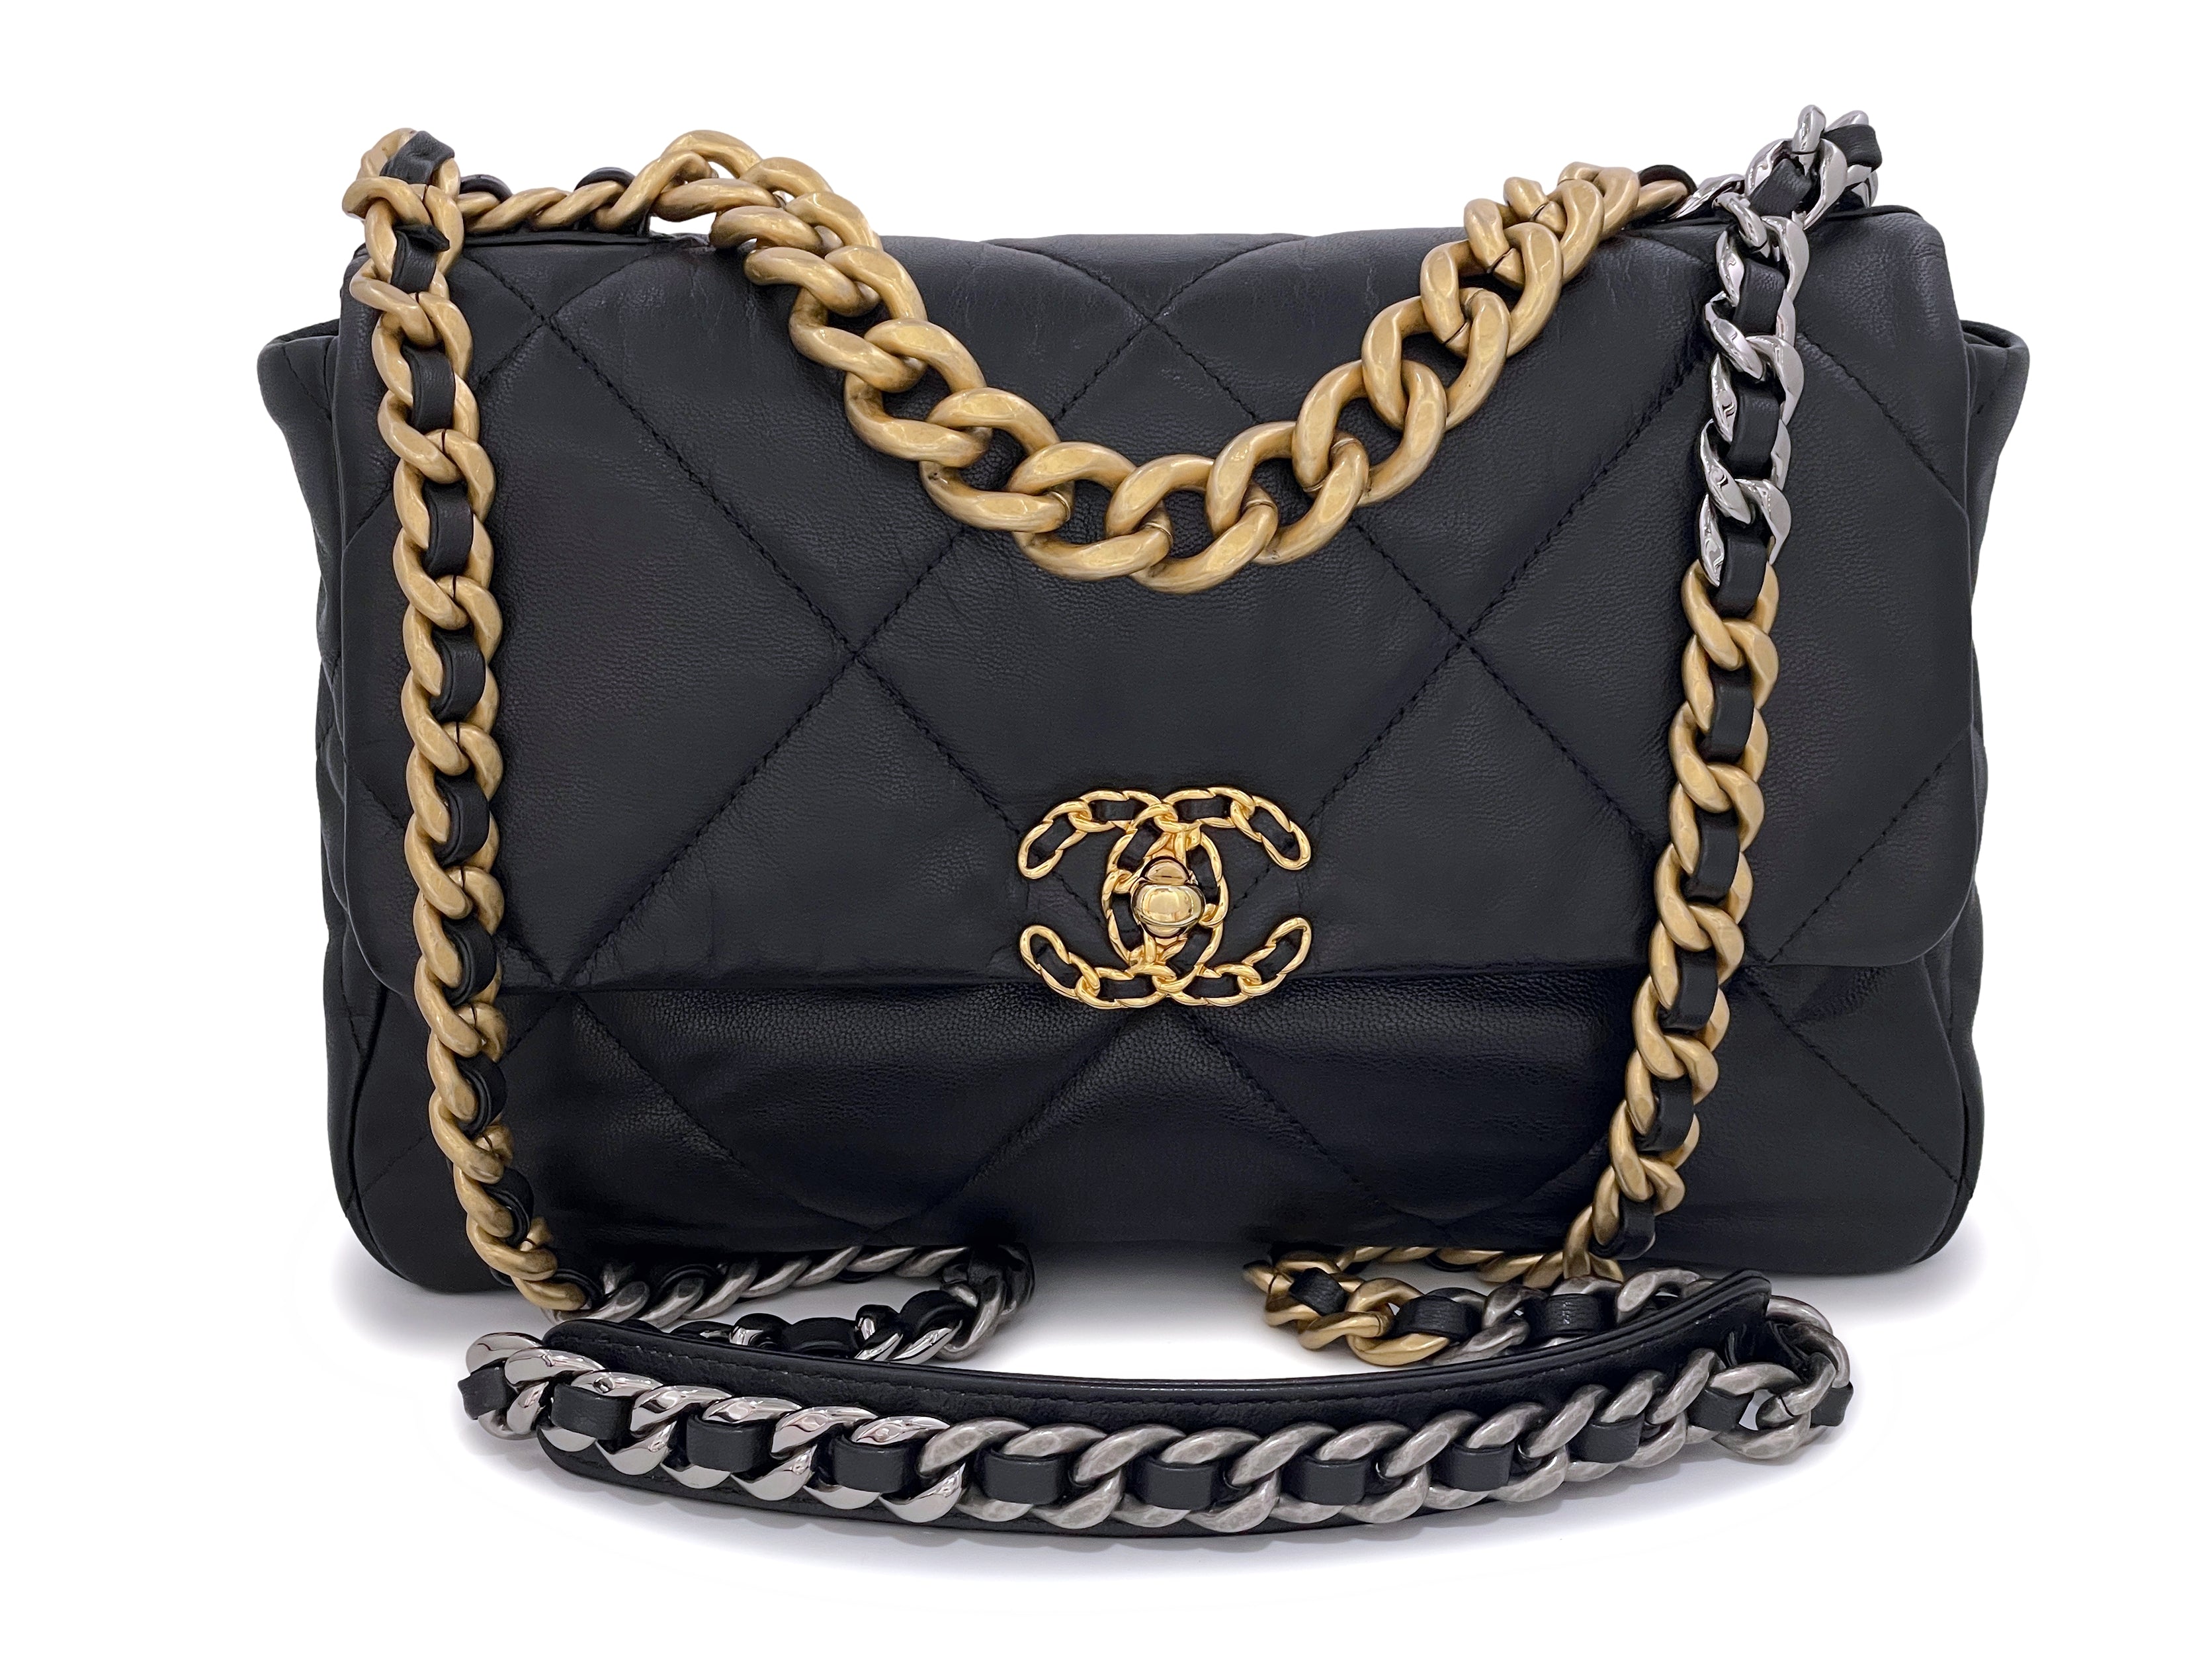 Chanel 19 Medium Flap Quilted Lambskin Leather Shoulder Bag